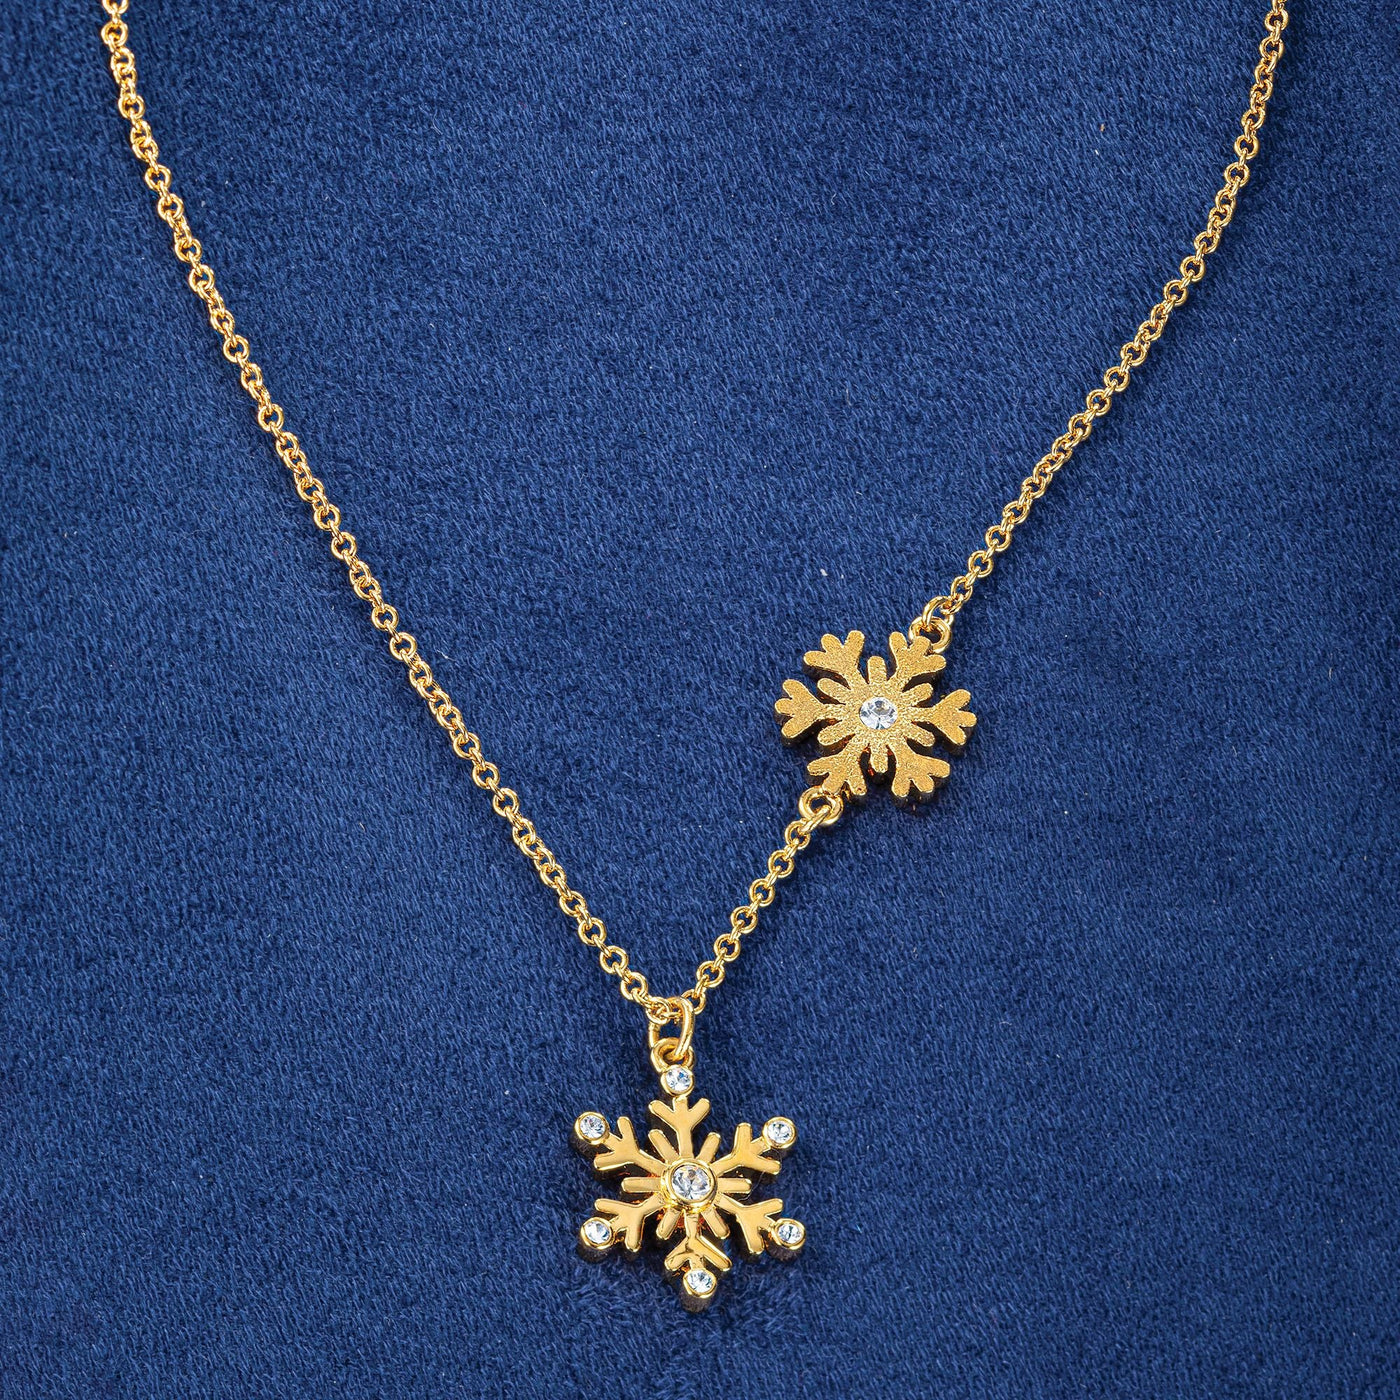 Gold Crystal Snowflake Necklace